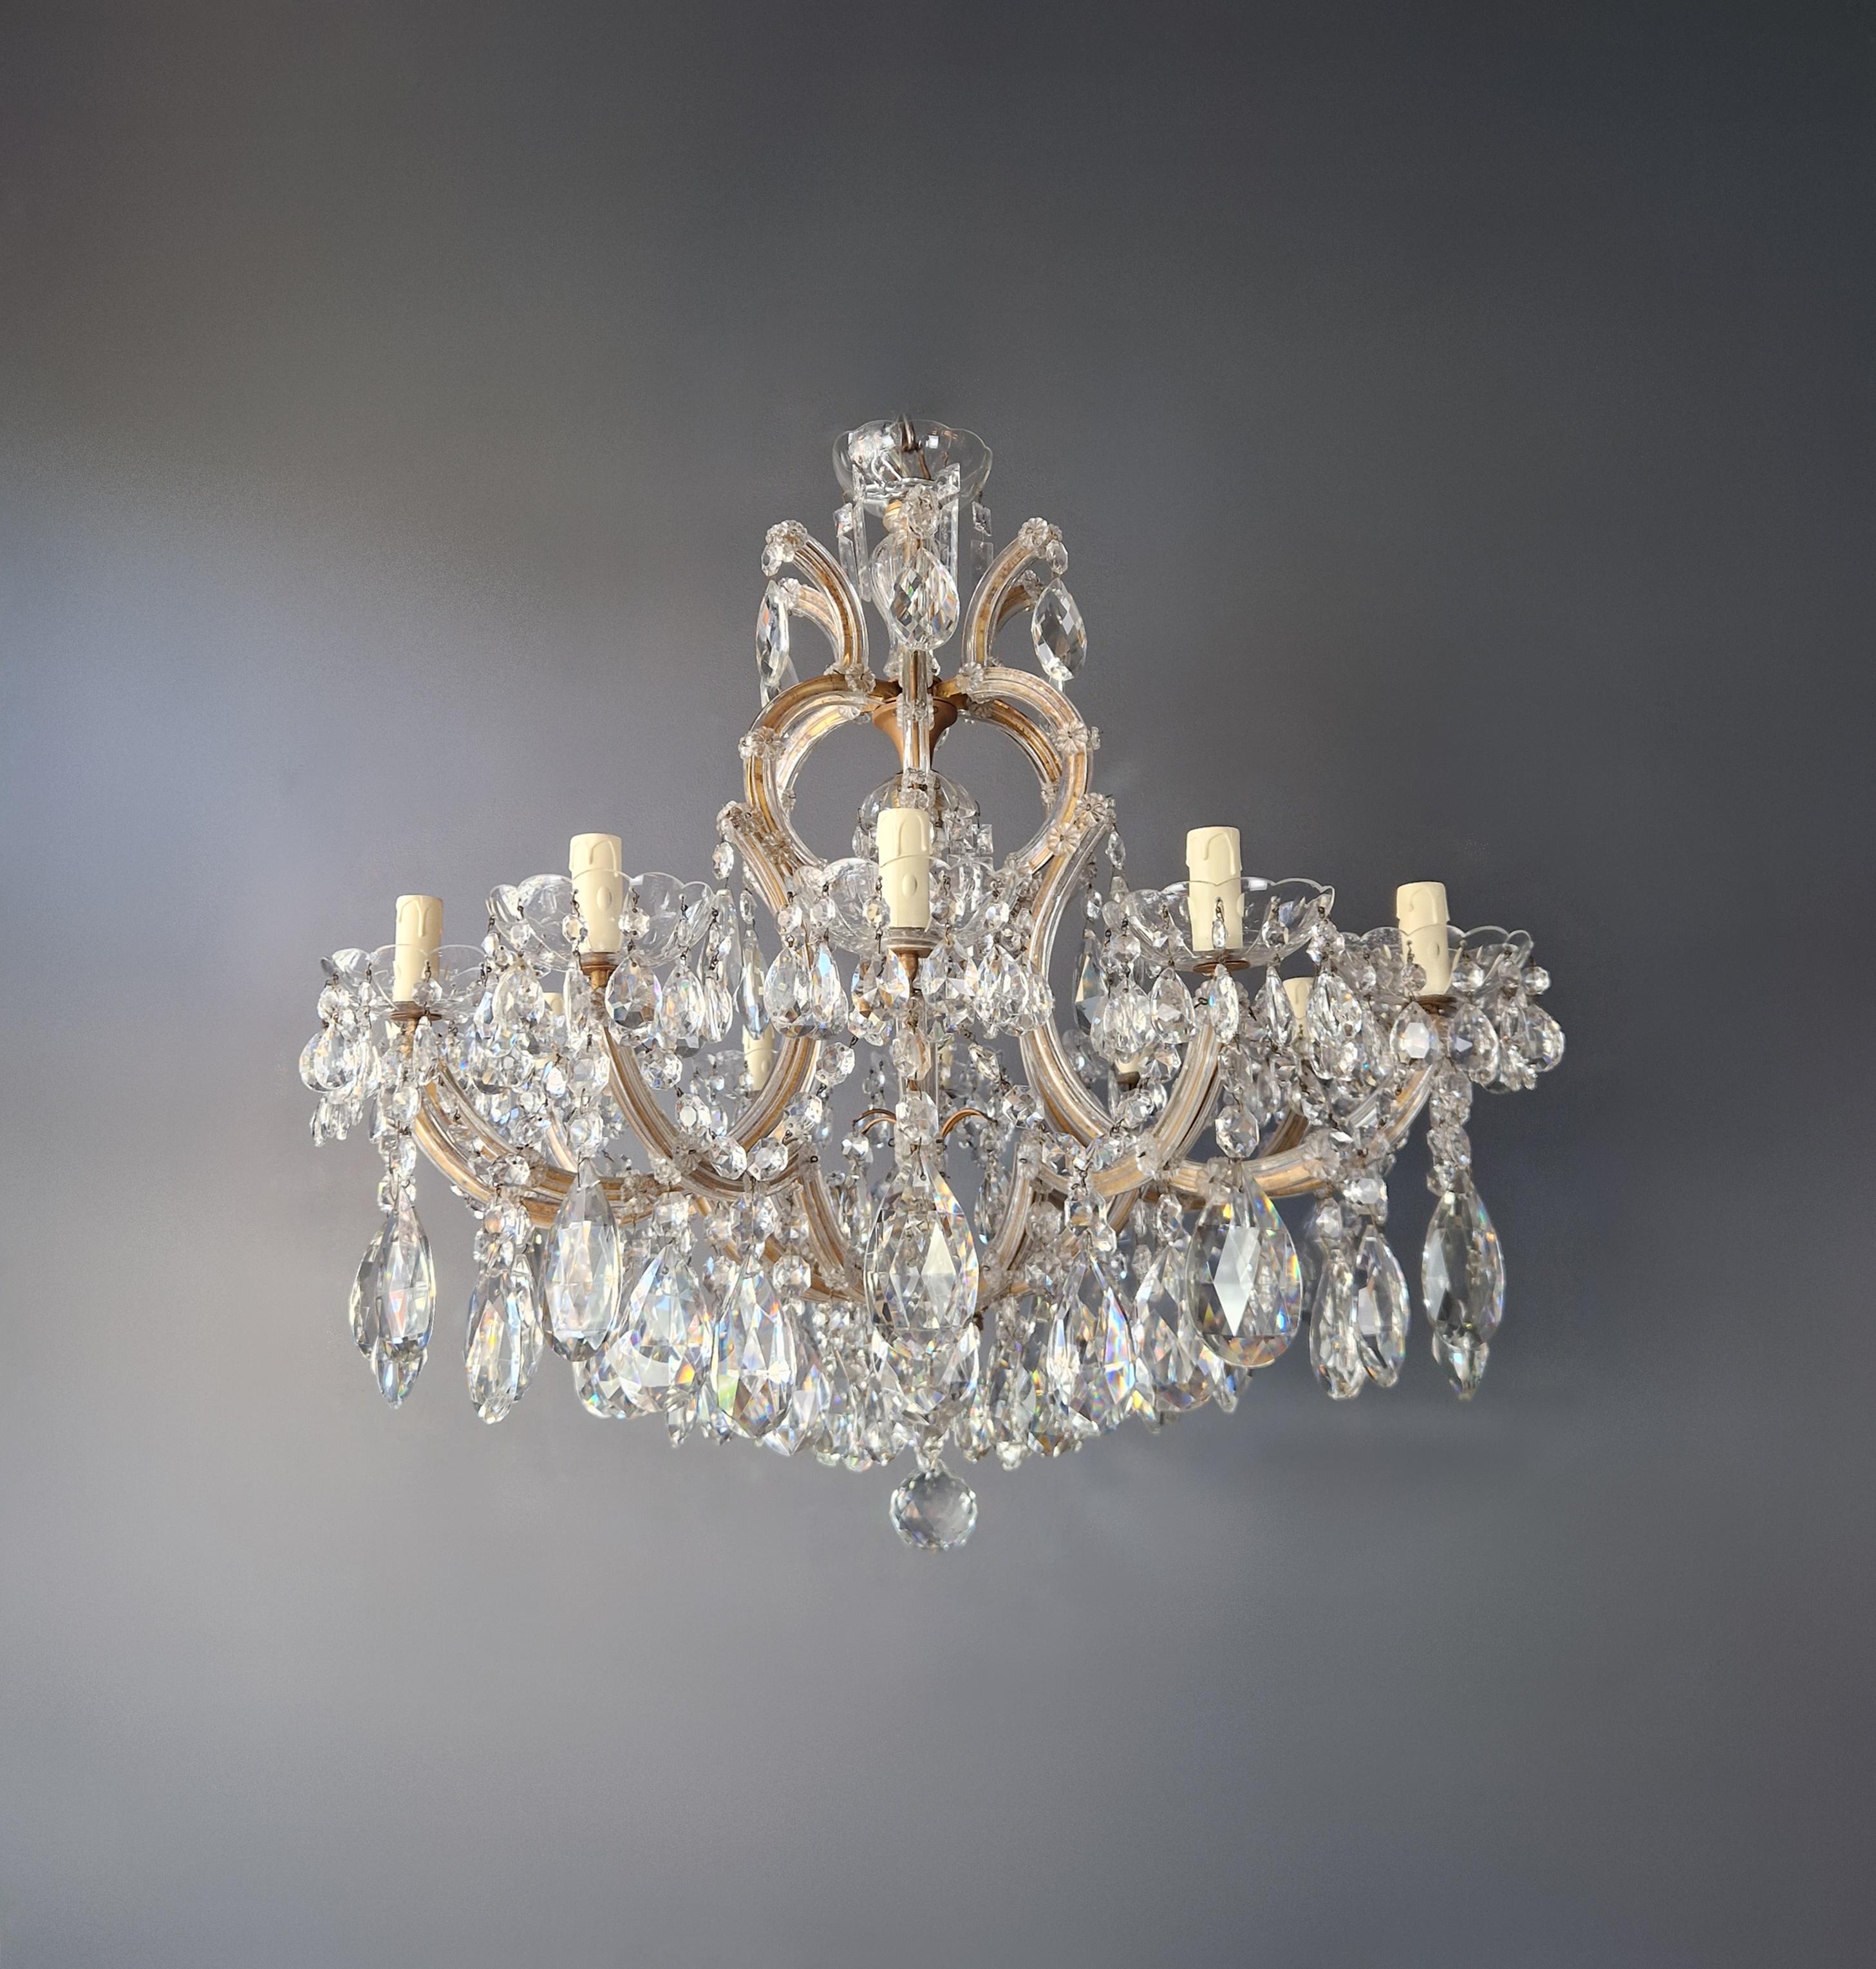 Hand-Knotted 1930s Art Nouveau Maria Theresa Crystal Chandelier lustre Brass Glass  For Sale